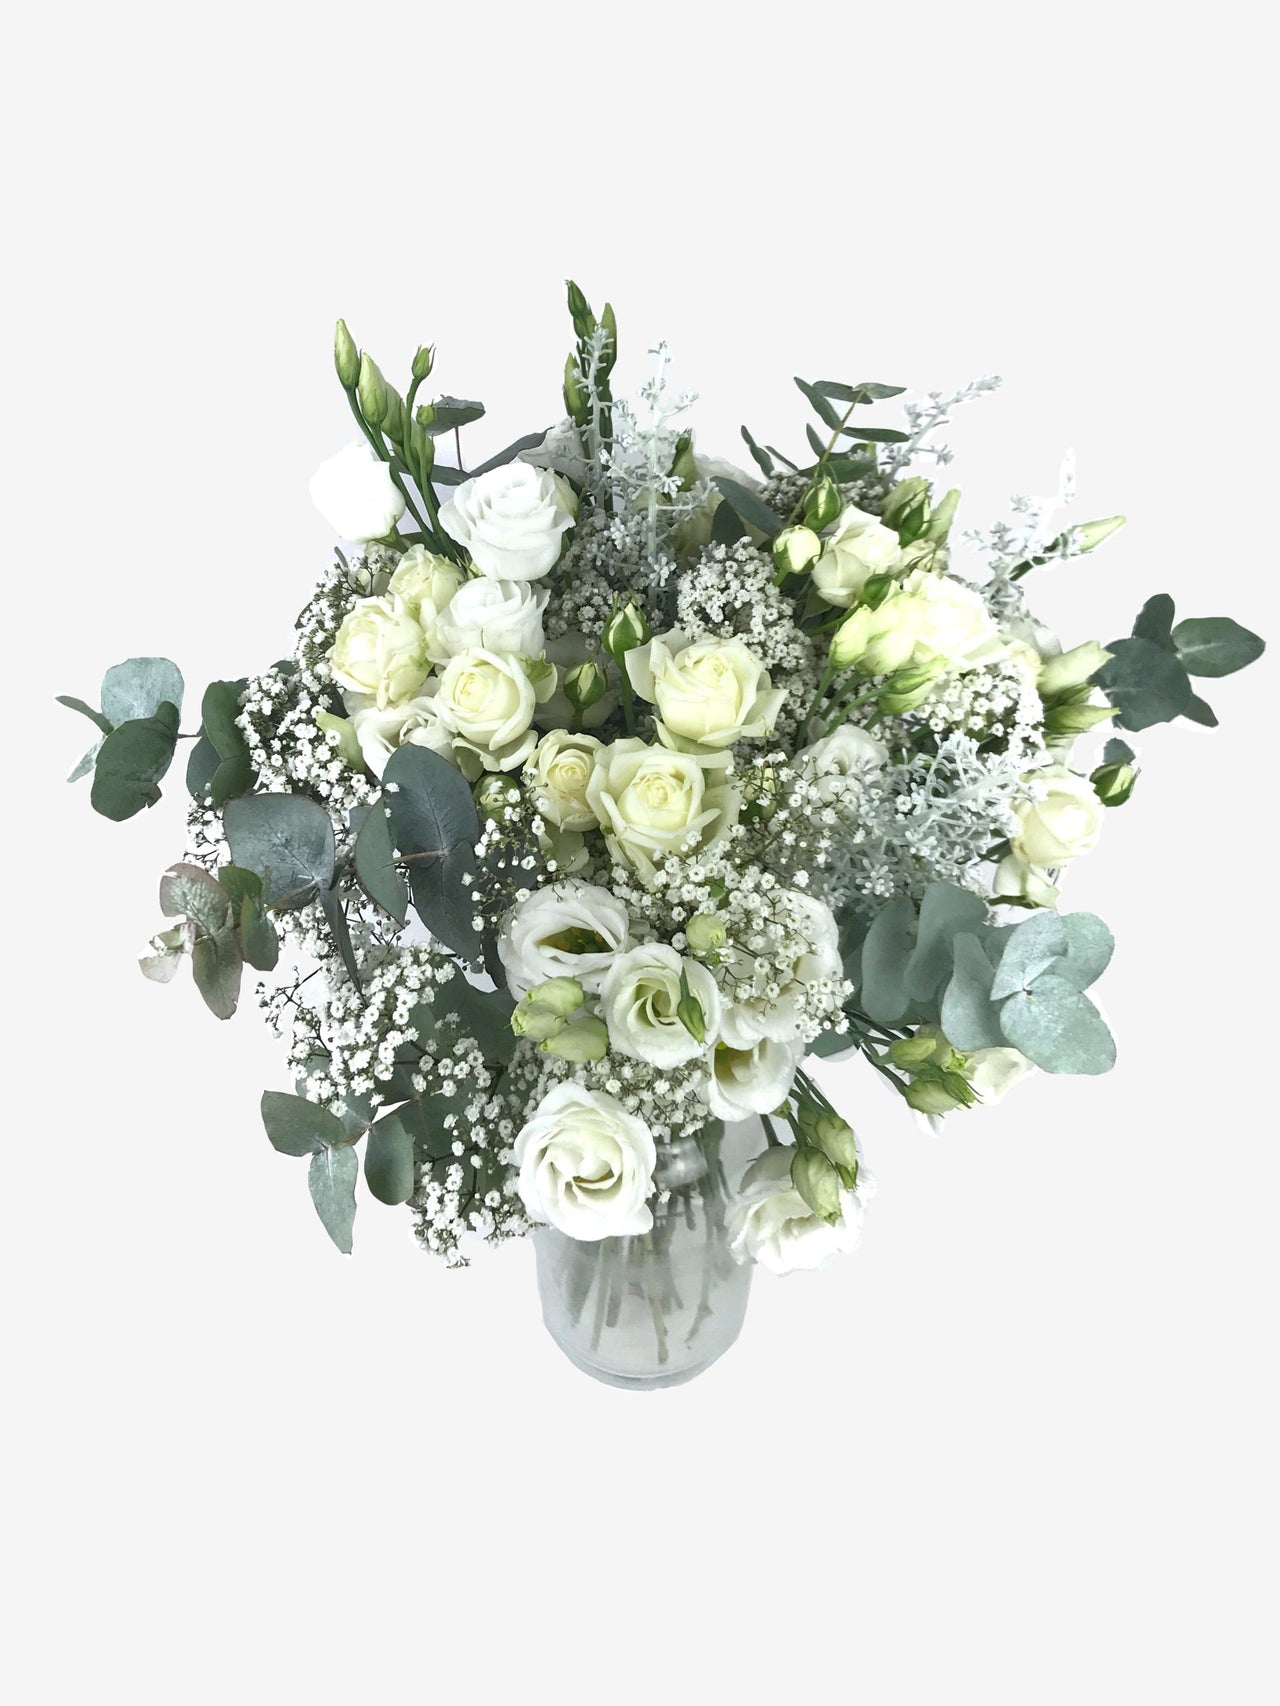 Birthday bouquet with white flowers - Bouquet 